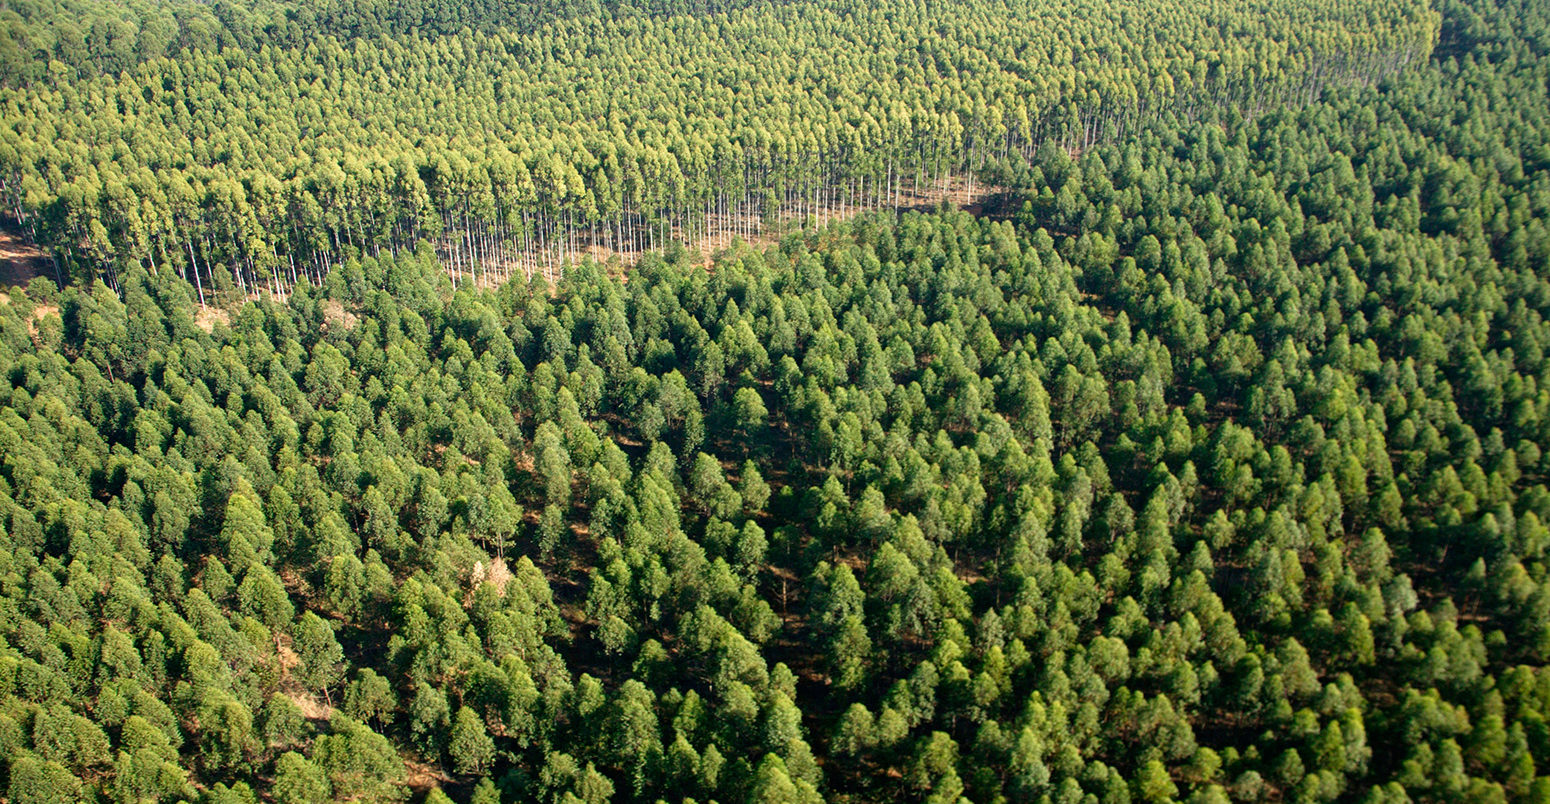 A7PKYG Aerial view of eucalyptus grandis or saligna trees in a commercial forestry plantation in South Africa Mpumalanga South Africa. Credit: AfriPics.com / Alamy Stock Photo